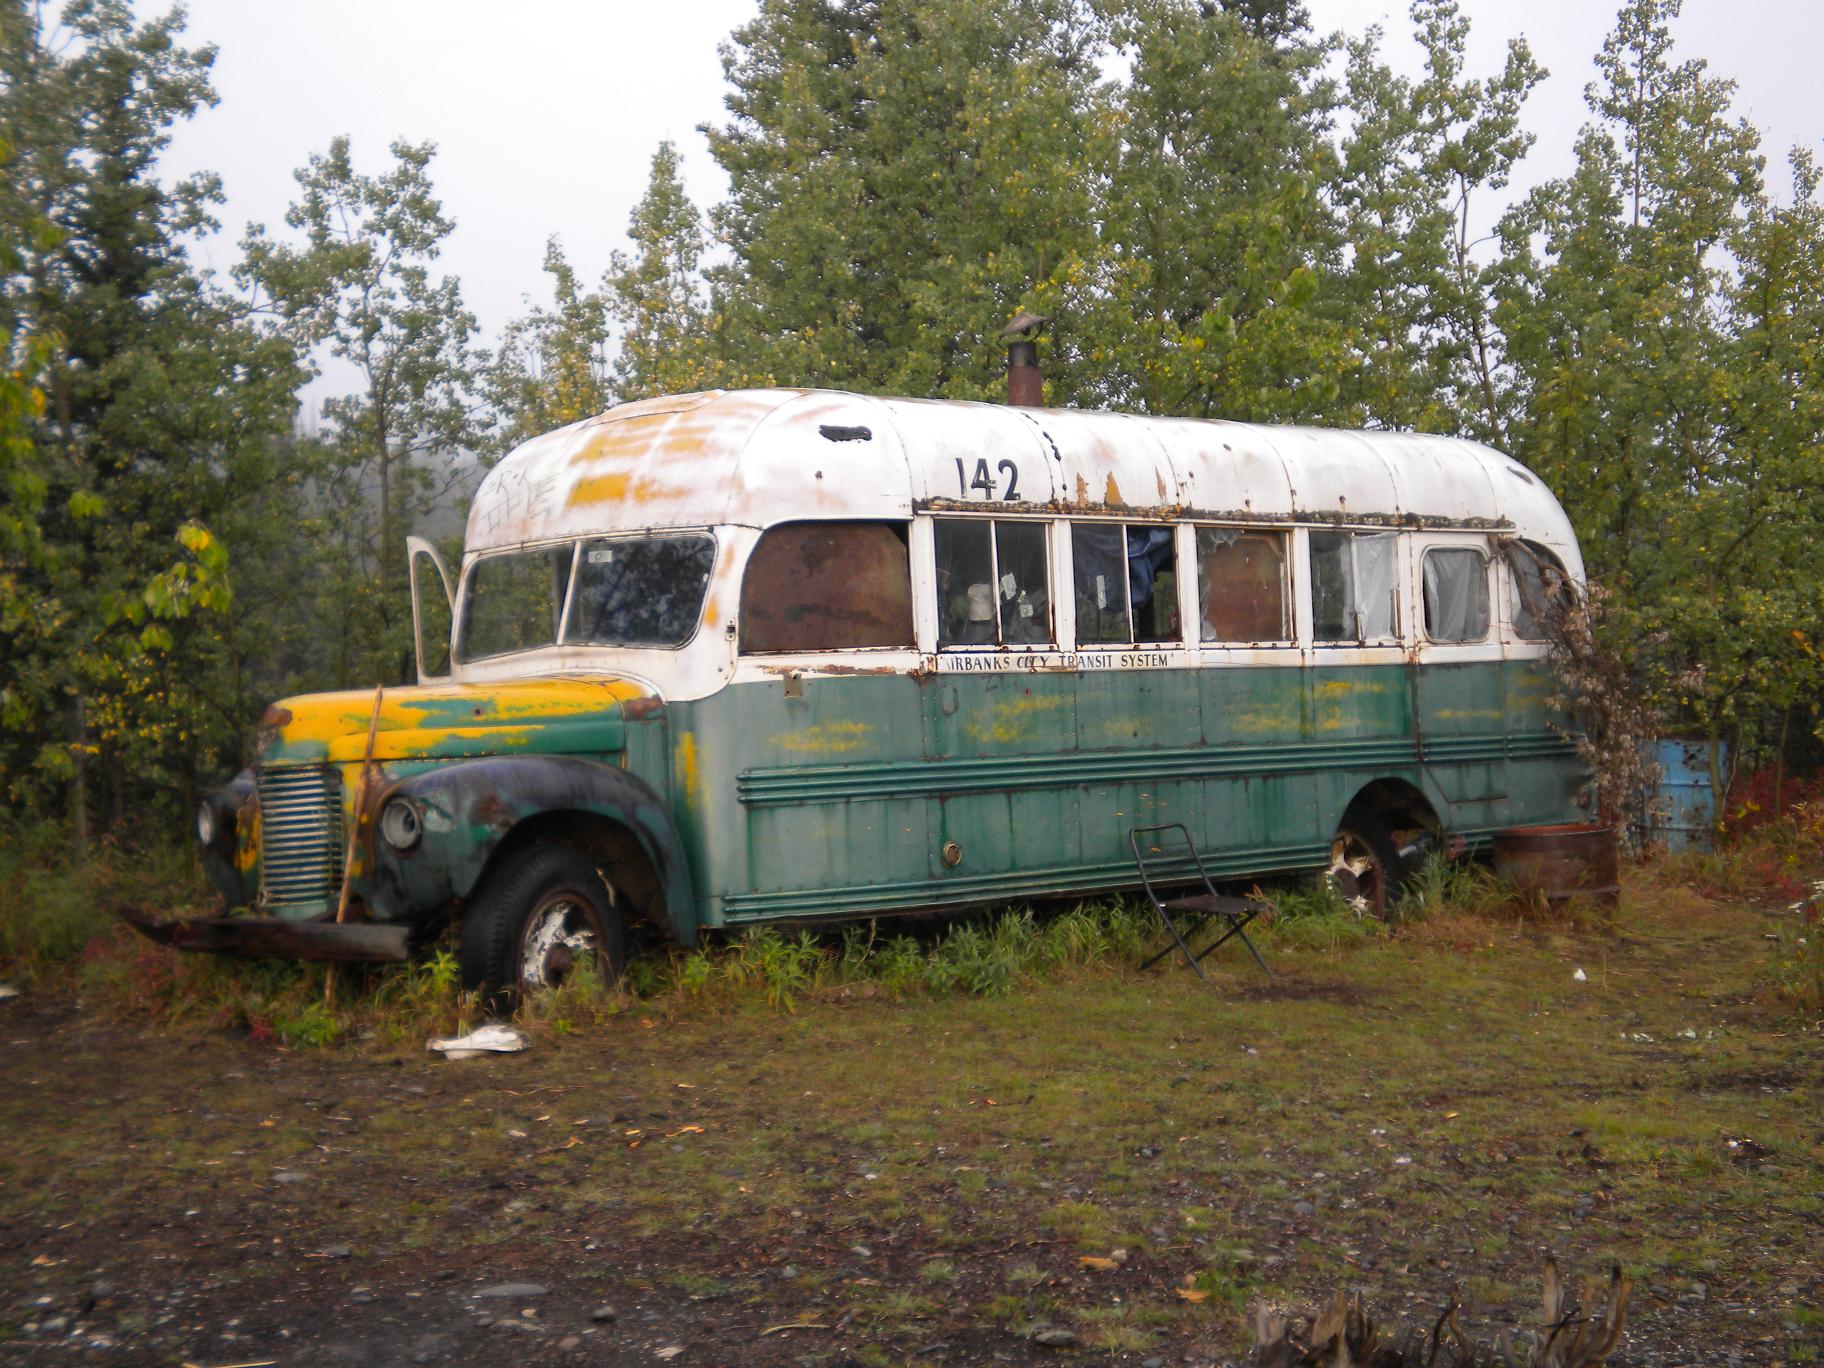 Anyone visit that bus from the movie 